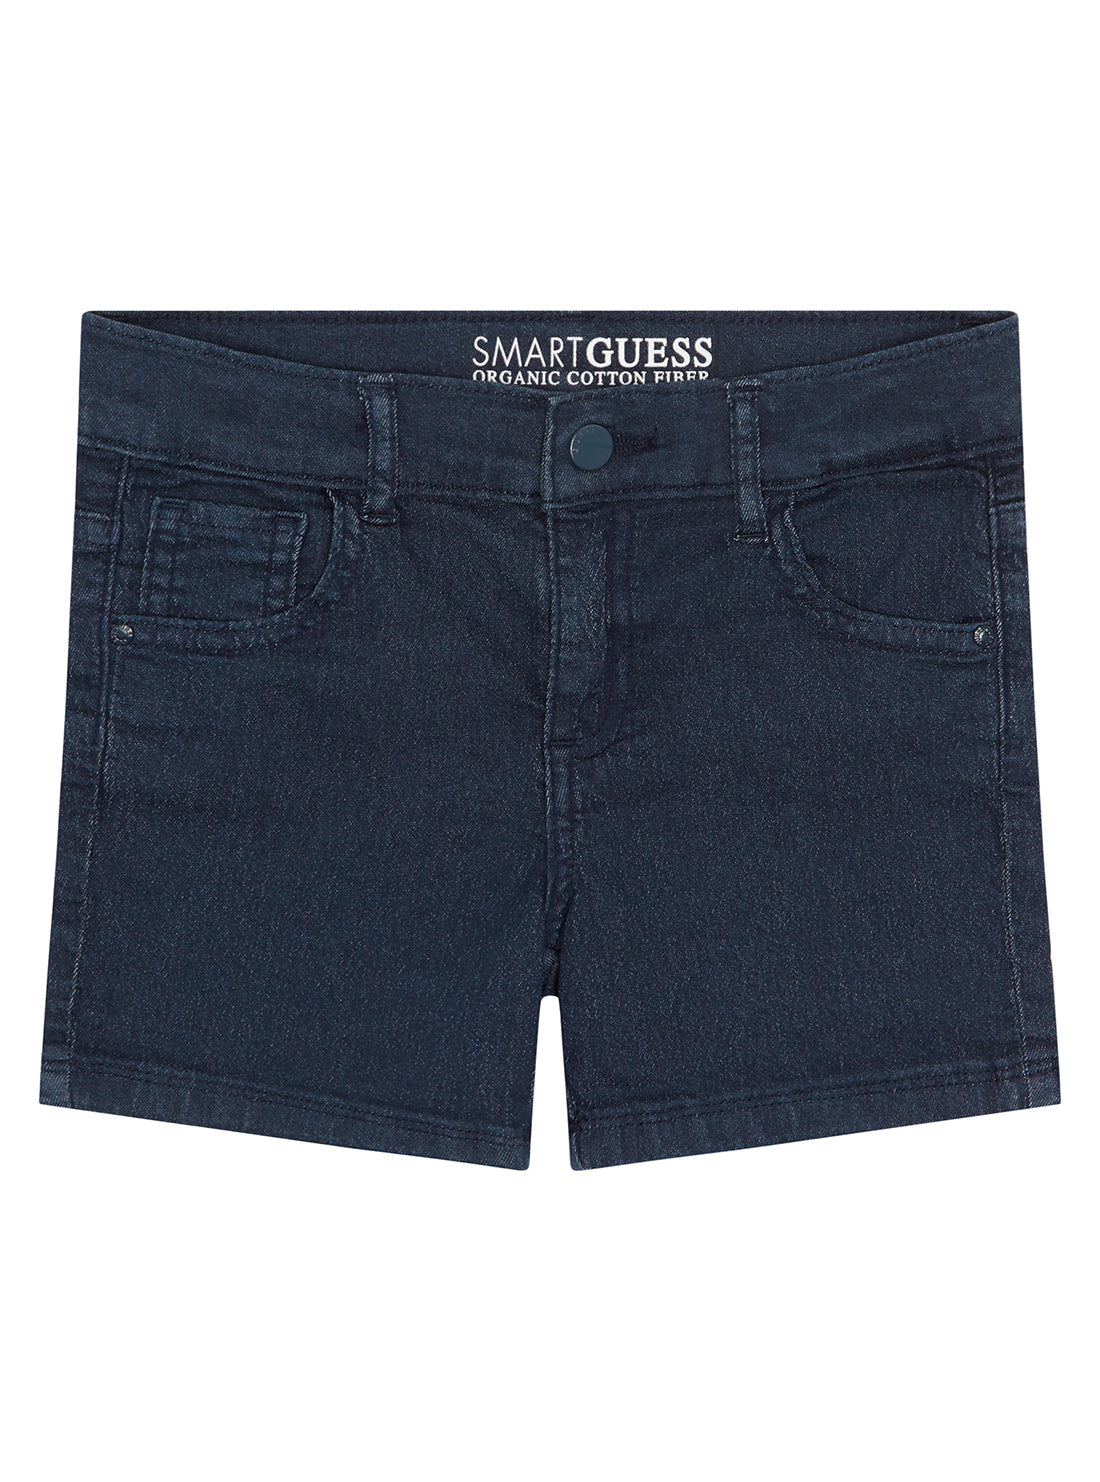 GUESS Navy Stretch Bull Denim Shorts (2-7) front view